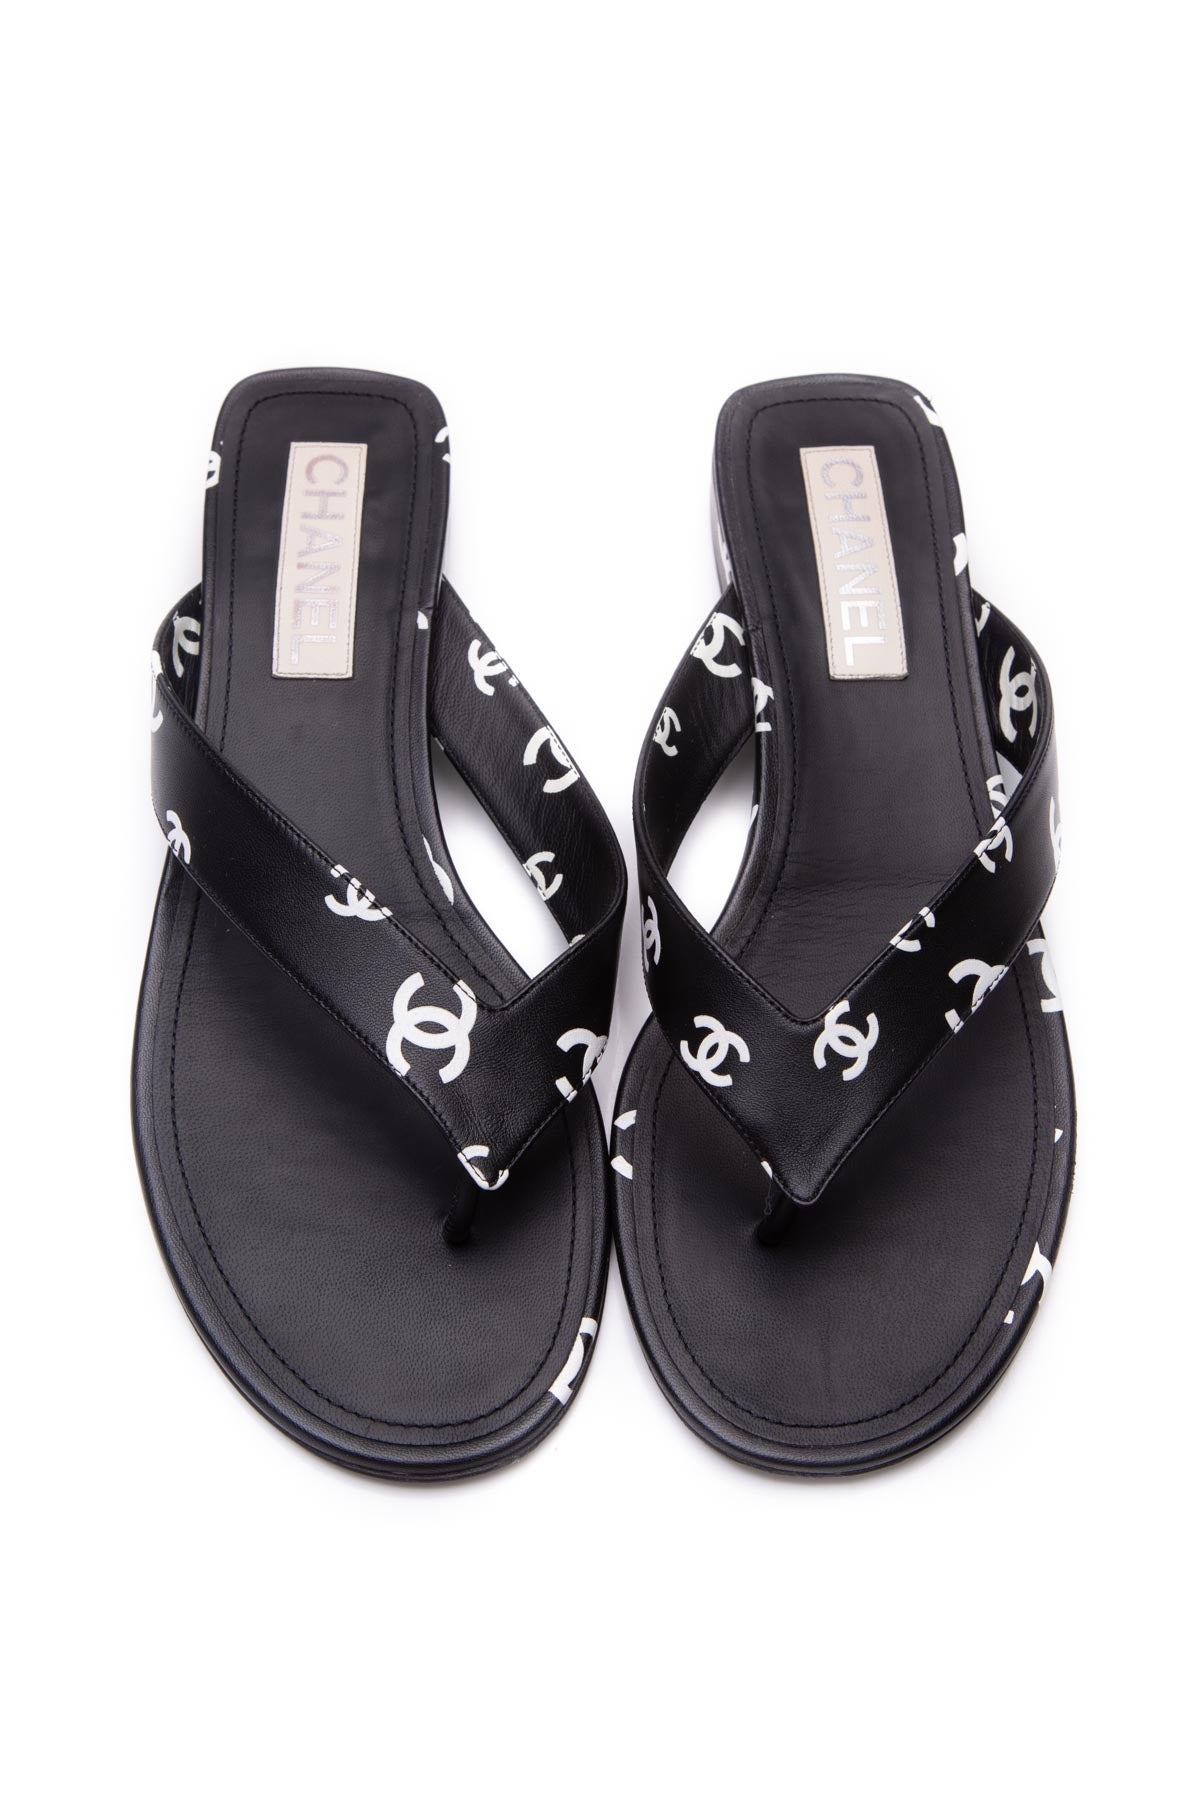 Leather sandal Chanel Black size 40.5 EU in Leather - 16770549